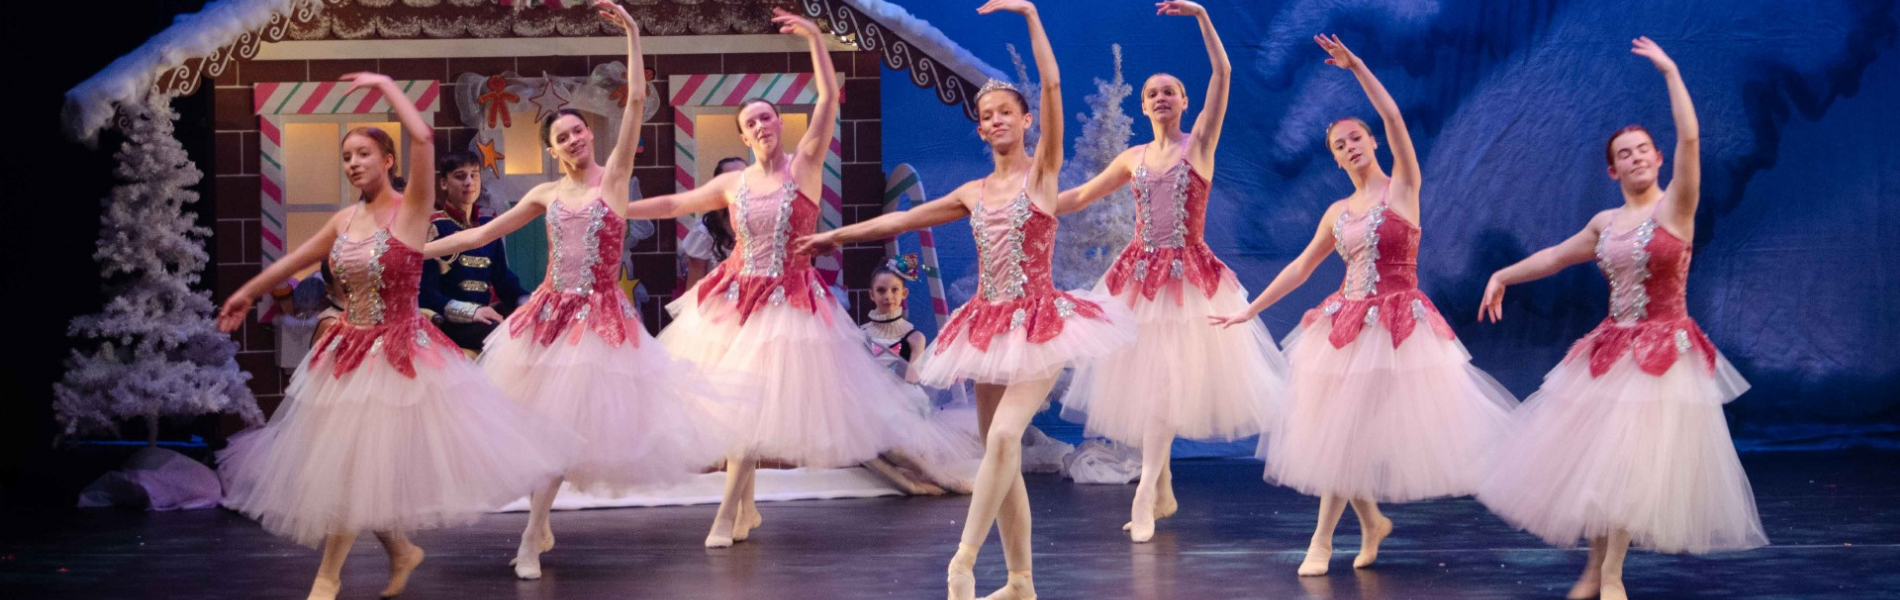 Ballerinas dancing on stage, with the Nutcracker set in the background.